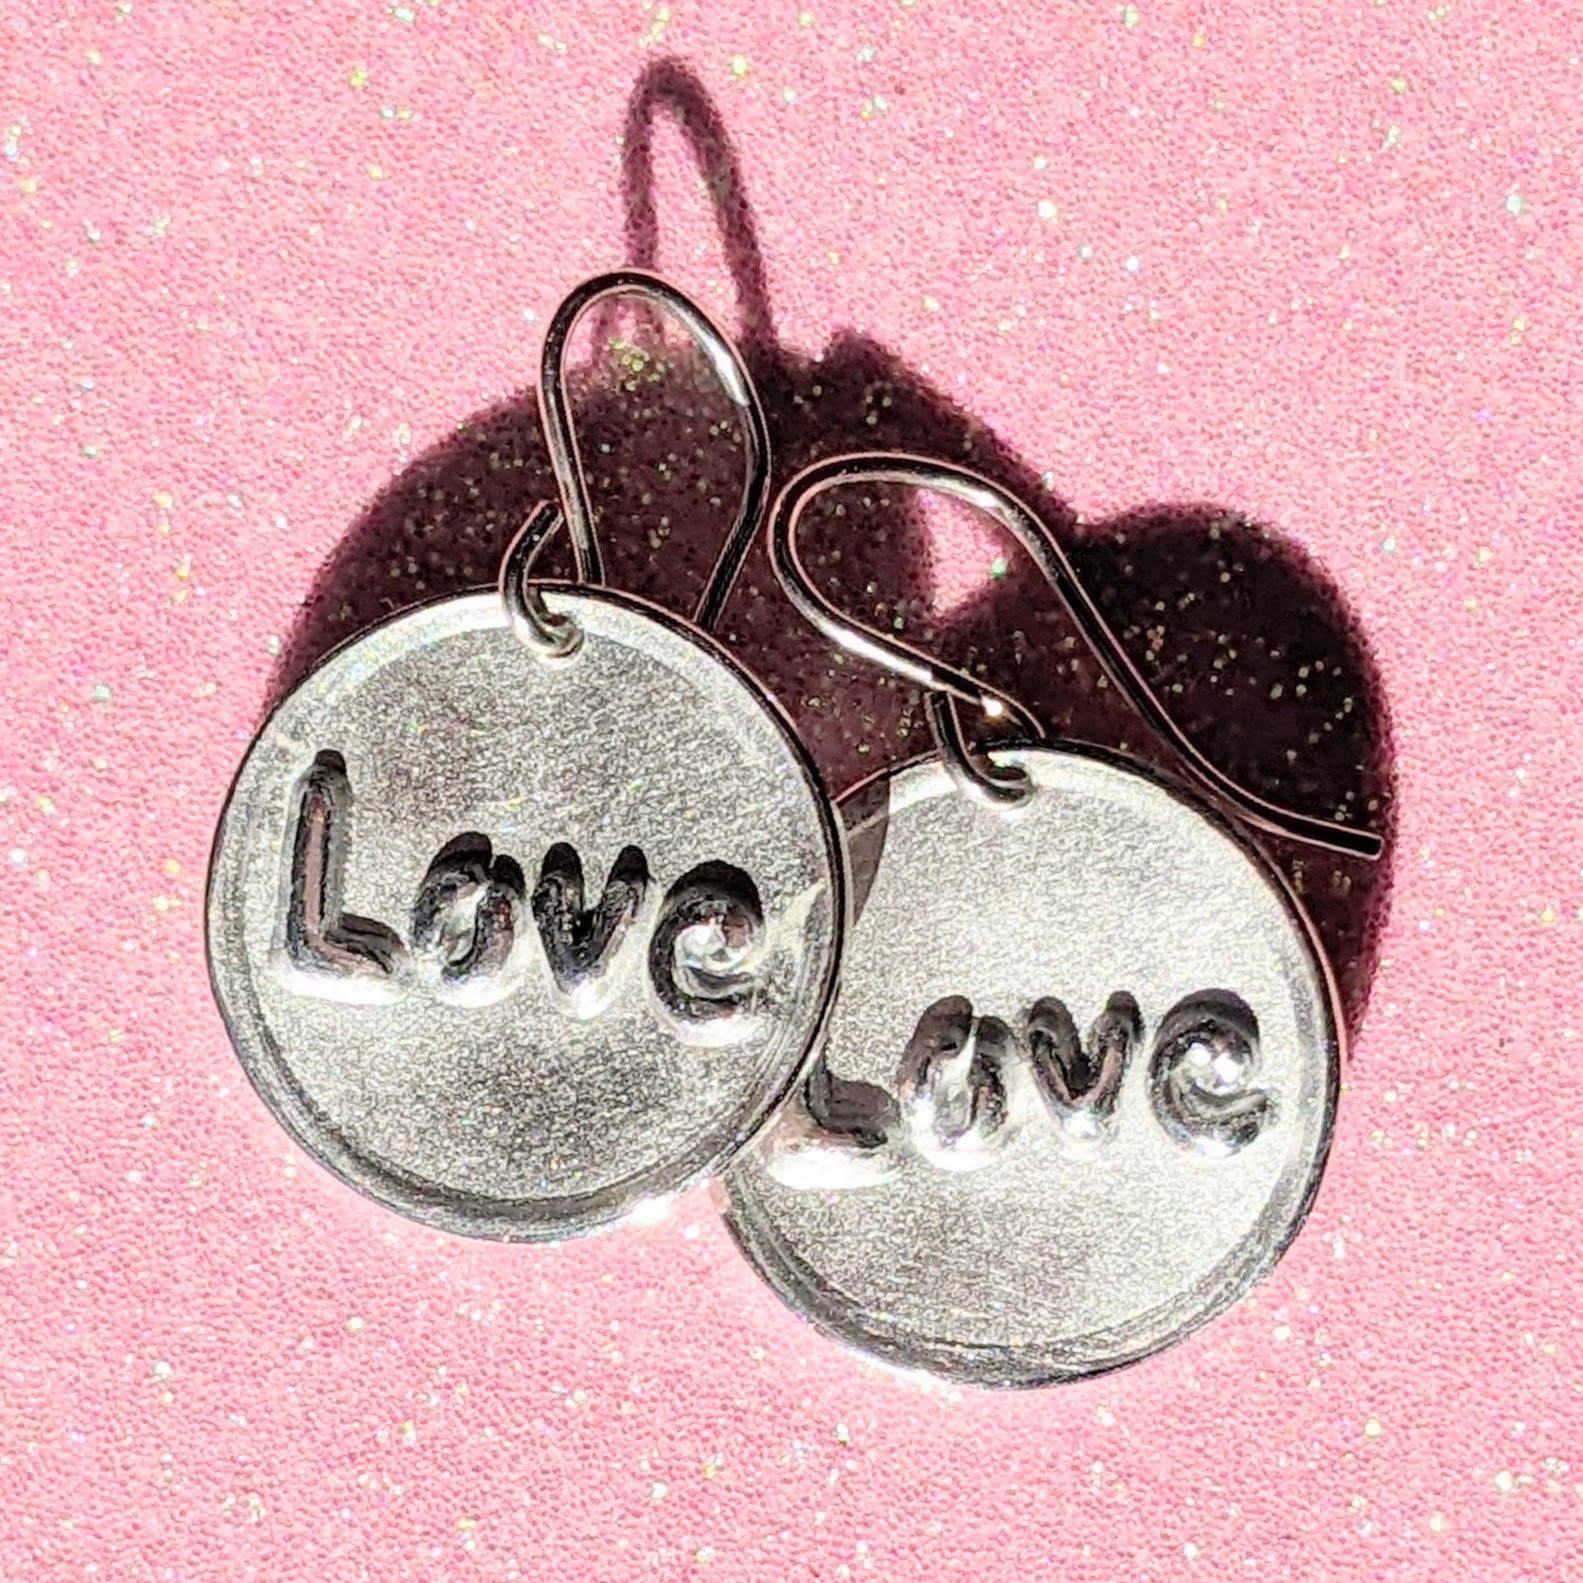 ROUND LOVE EARRINGS | <Z-FIRE.COM> The text "Love" is polished and highlighted on a frosted round background with polished edges.  .950 Fine Silver Discs About 11/16" Diameter About 1.8 cm Diameter .925 Sterling Silver Ear Wires